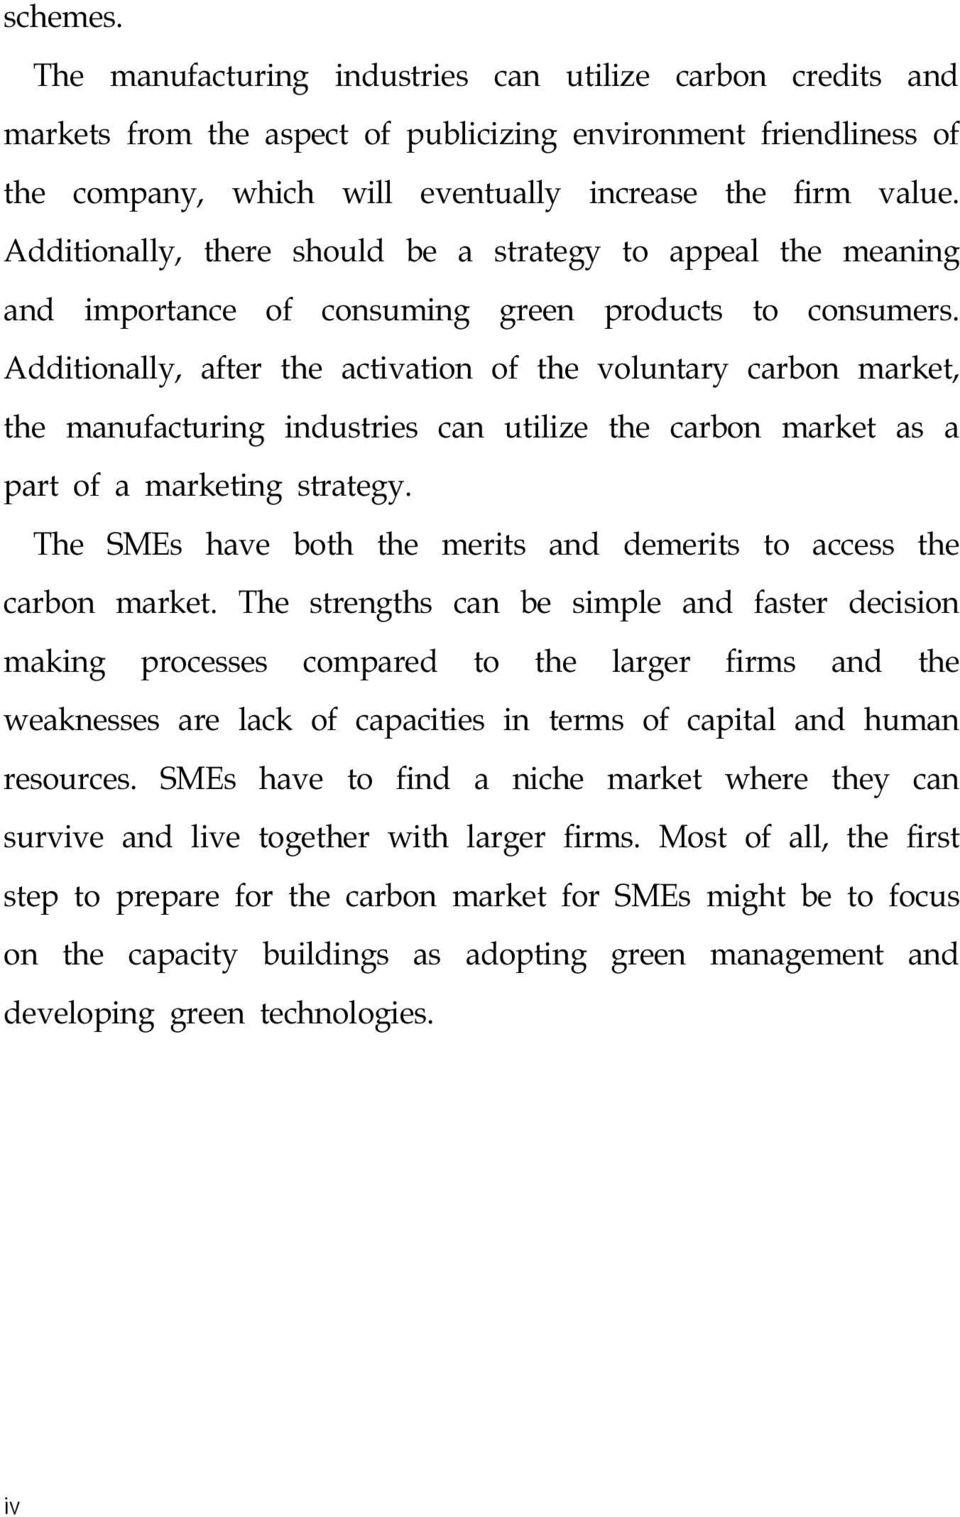 Additionally, after the activation of the voluntary carbon market, the manufacturing industries can utilize the carbon market as a part of a marketing strategy.